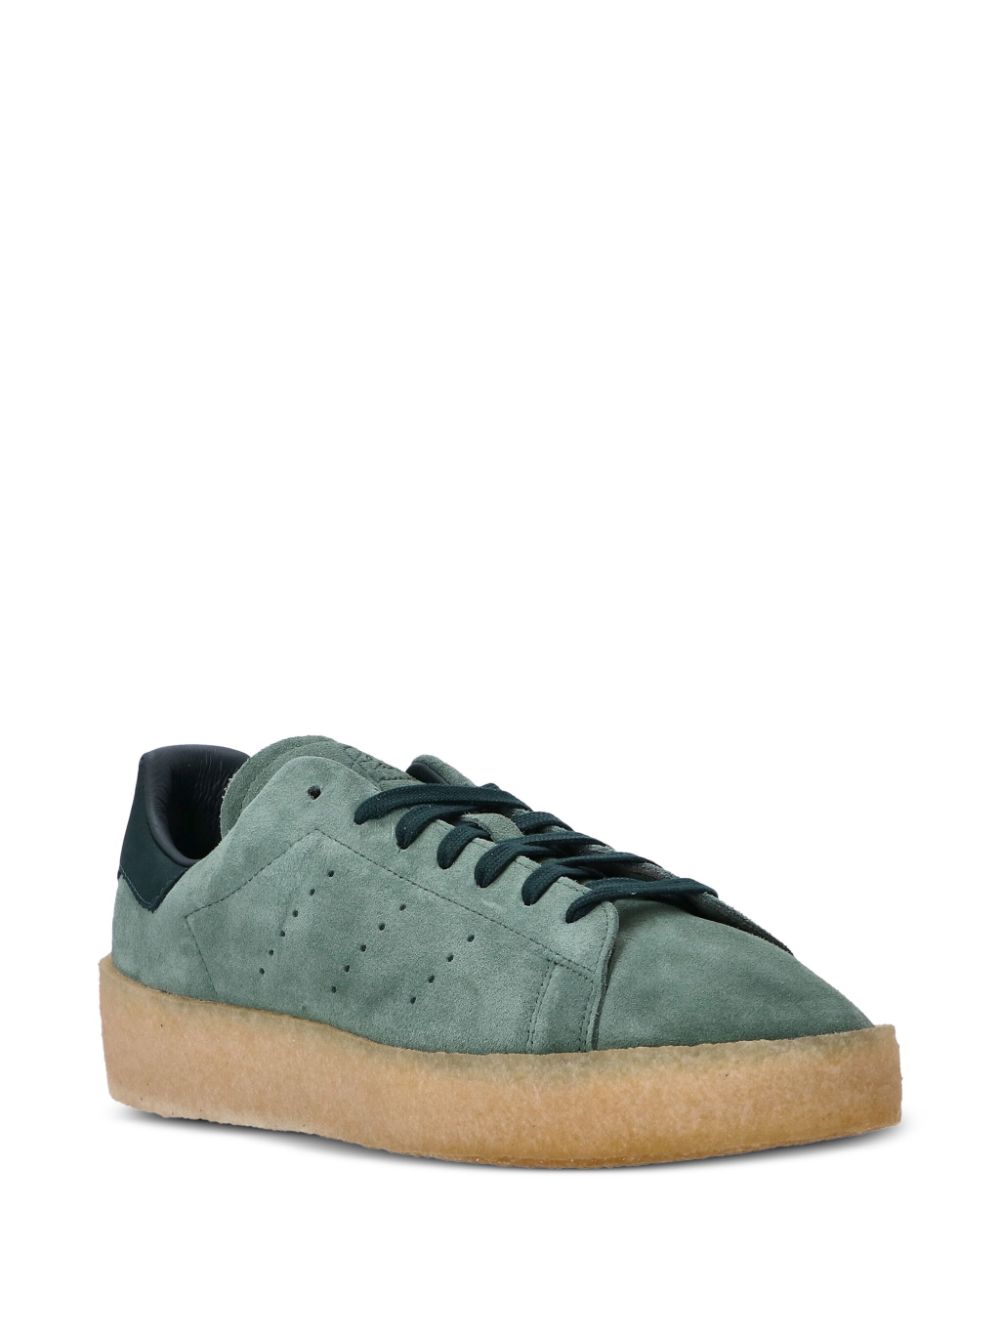 Adidas Stan Smith Crepe Trainers In Green | ModeSens